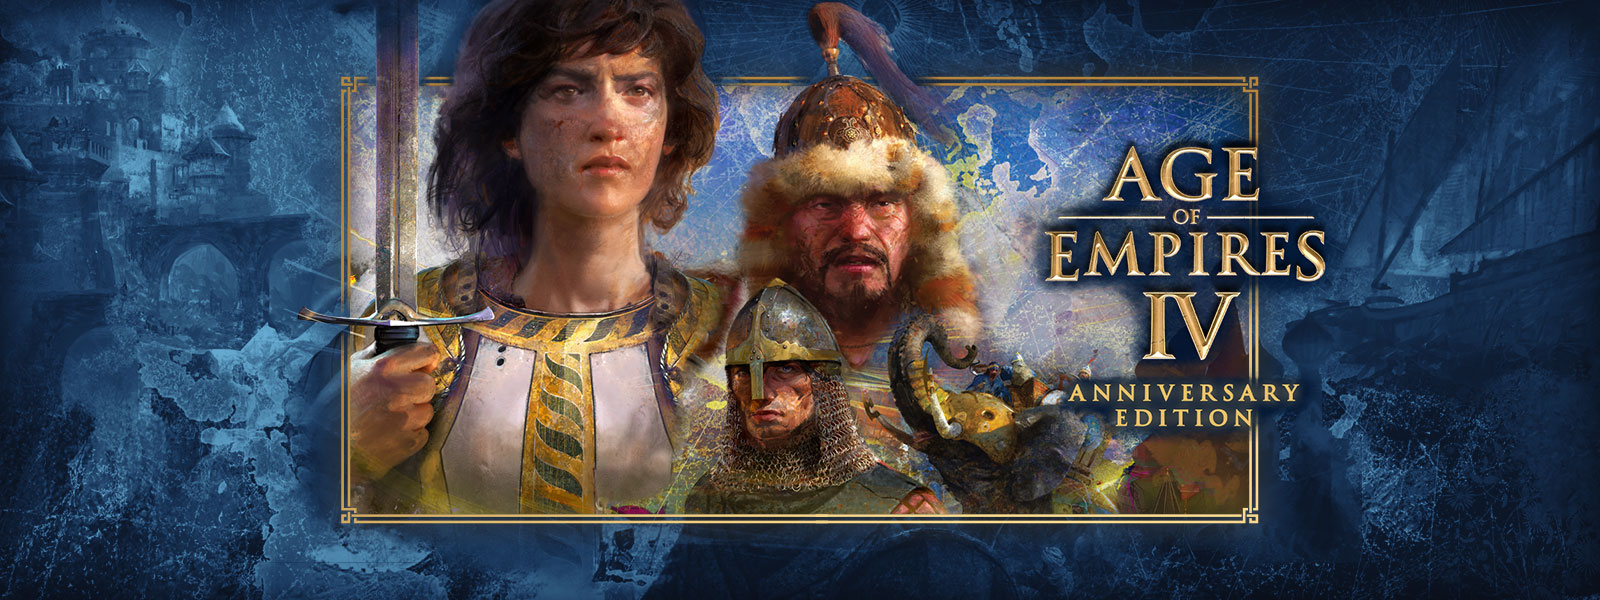 Age of Empires IV: Anniversary Edition. Three characters with scenes of war and armored elephants around them.